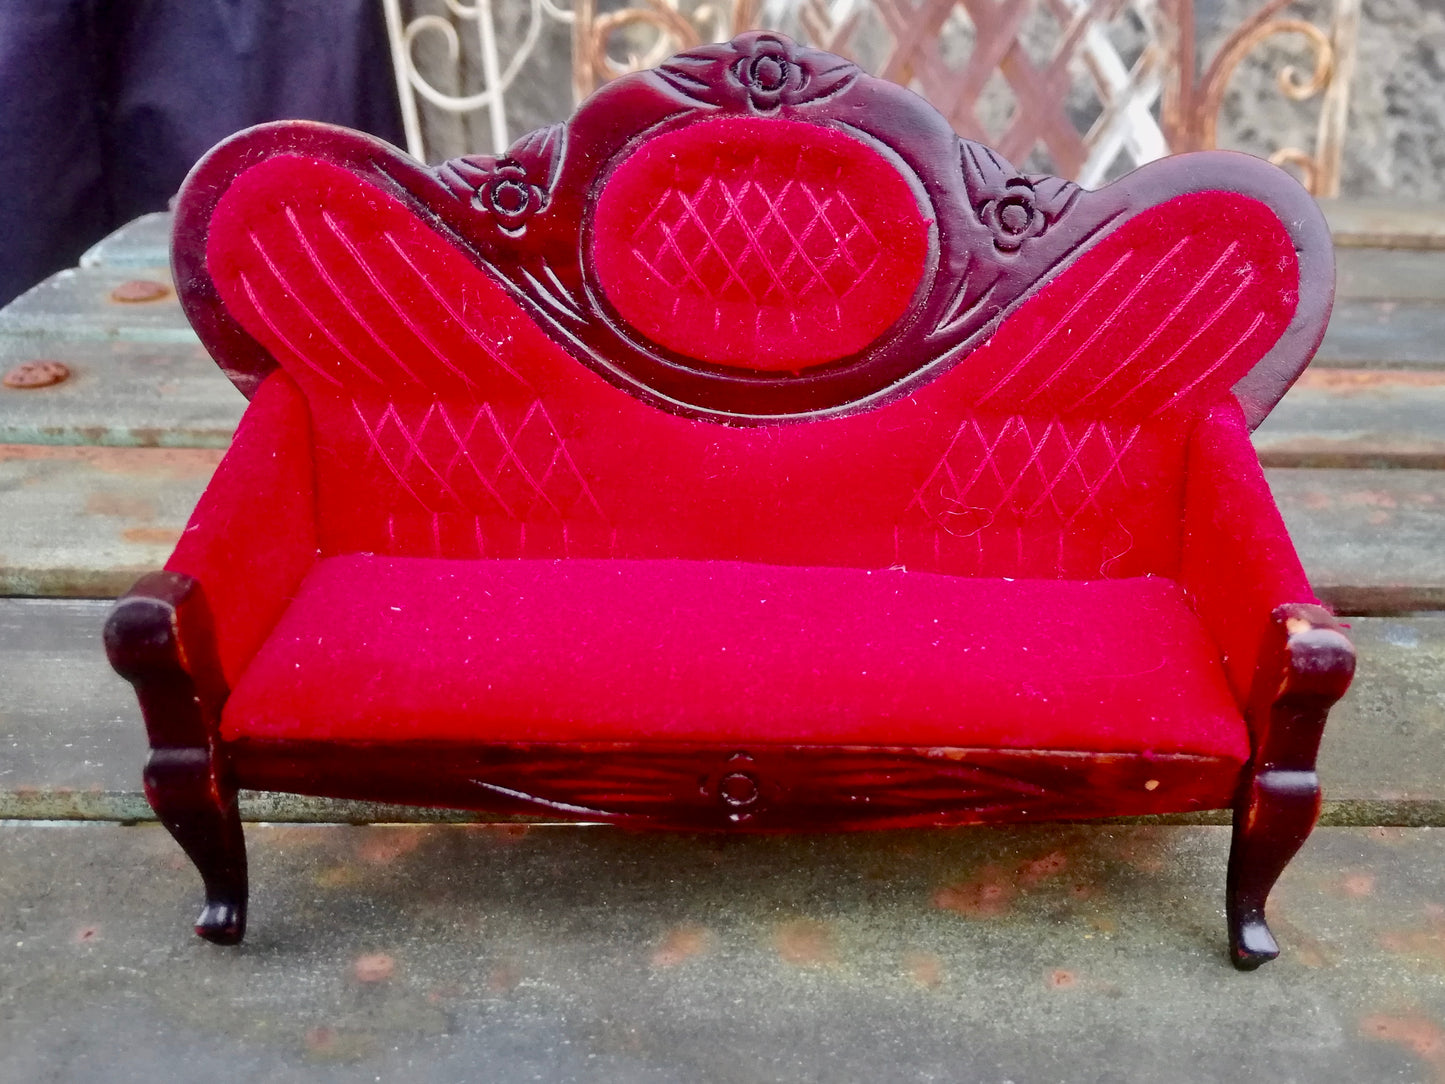 Vintage wooden dolls house sofa with red upholstery